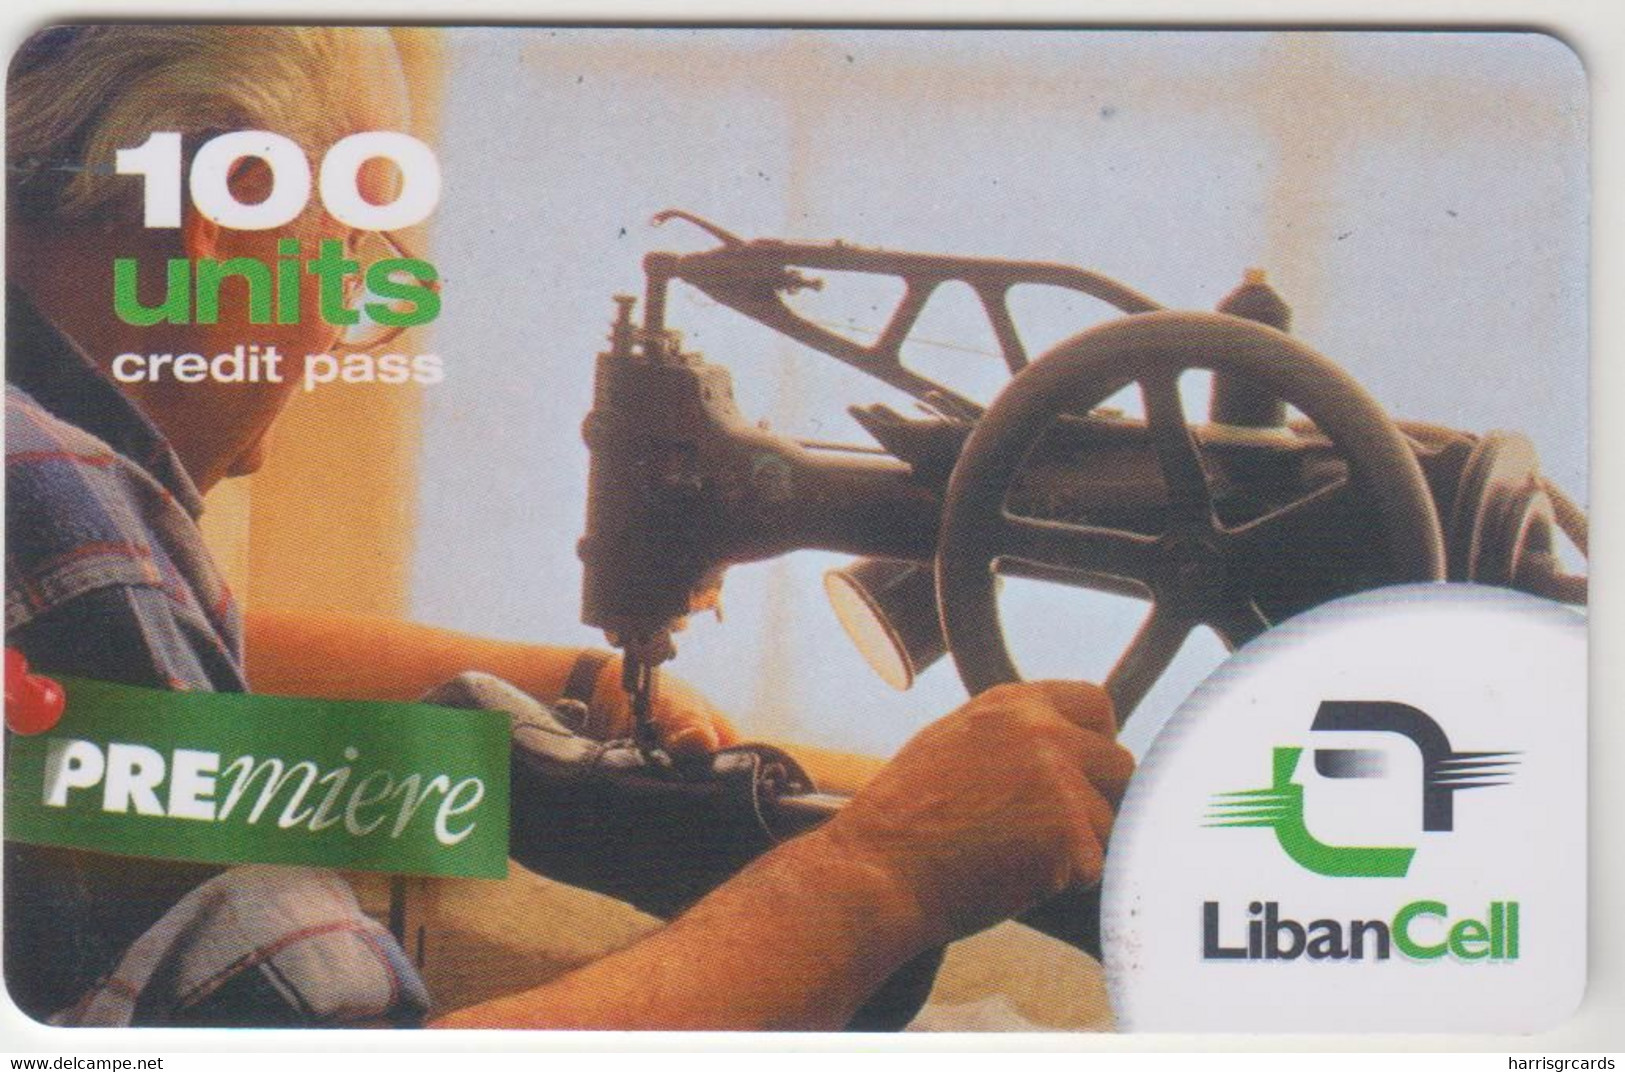 LEBANON - Premiere - Sewing Machine, Libancell Recharge Card 100 Units, Exp.date 27/01/06, Used - Lebanon